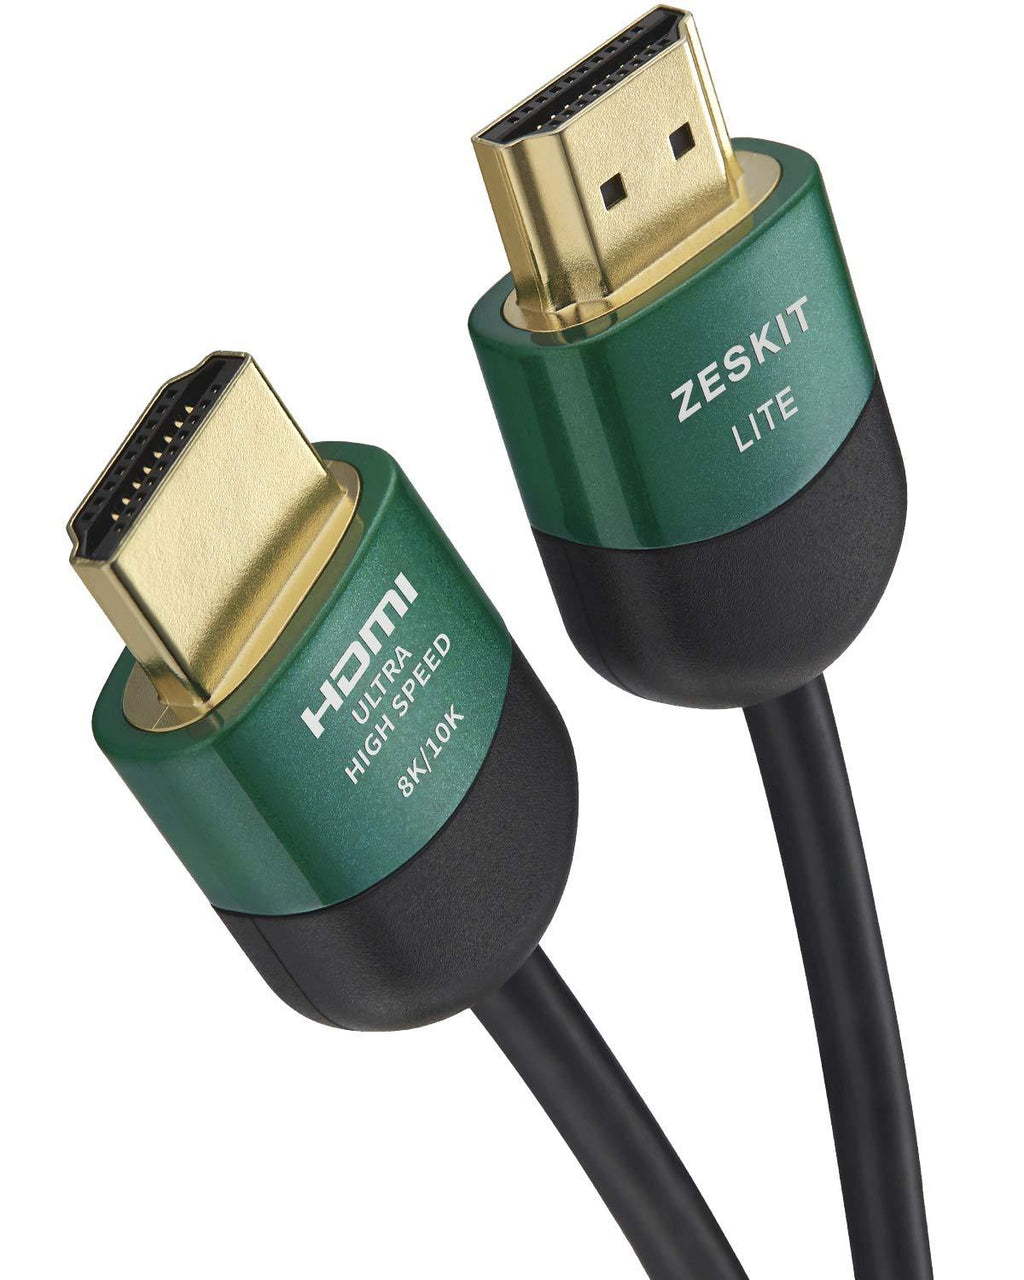 Zeskit Lite Ultra High Speed HDMI Cable 1.5m/5ft